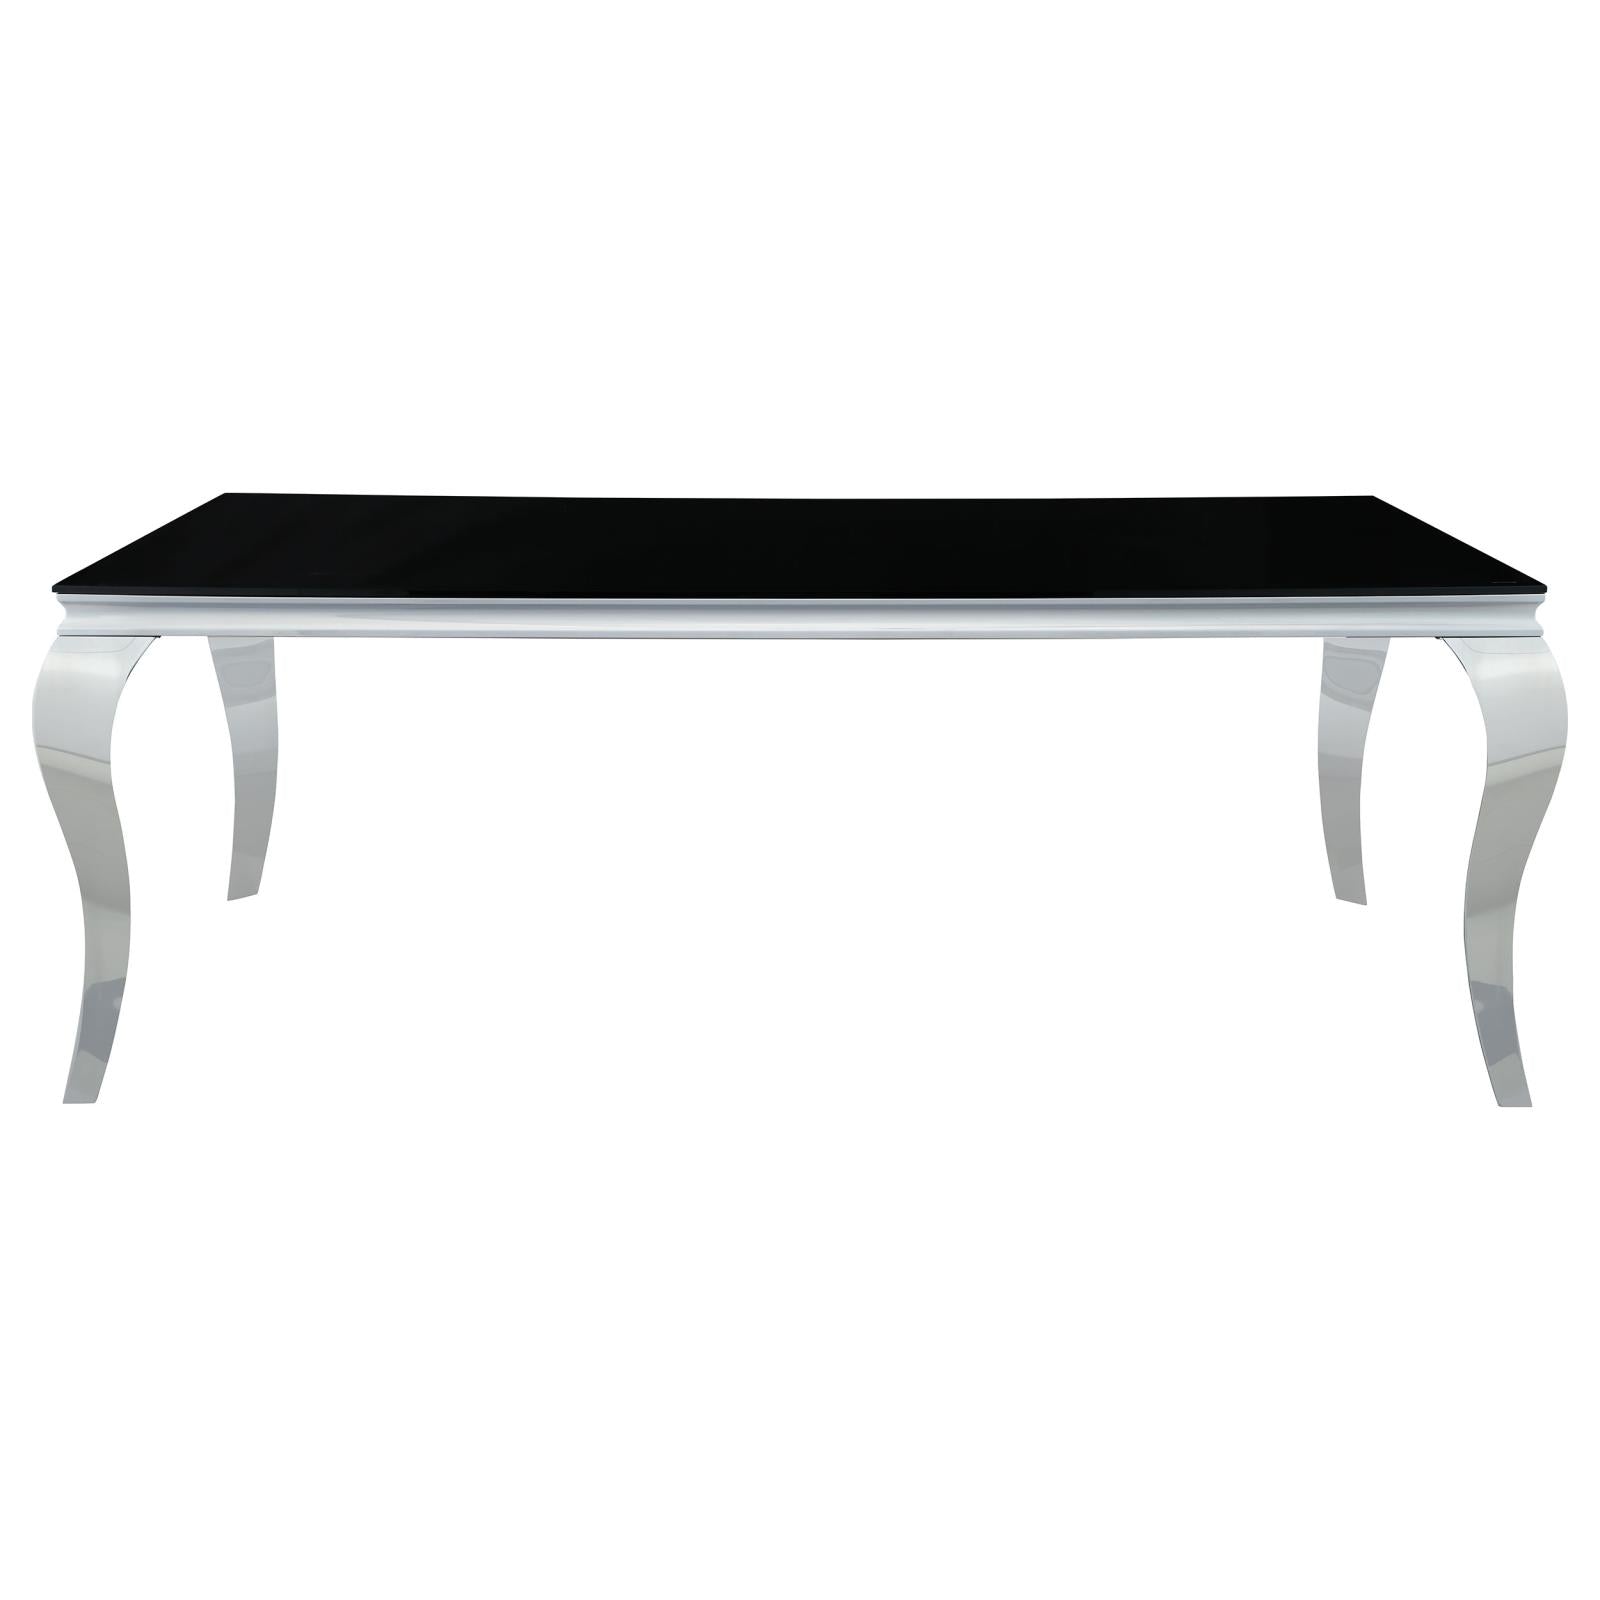 Carone Rectangular Glass Top Dining Table Black and Chrome image